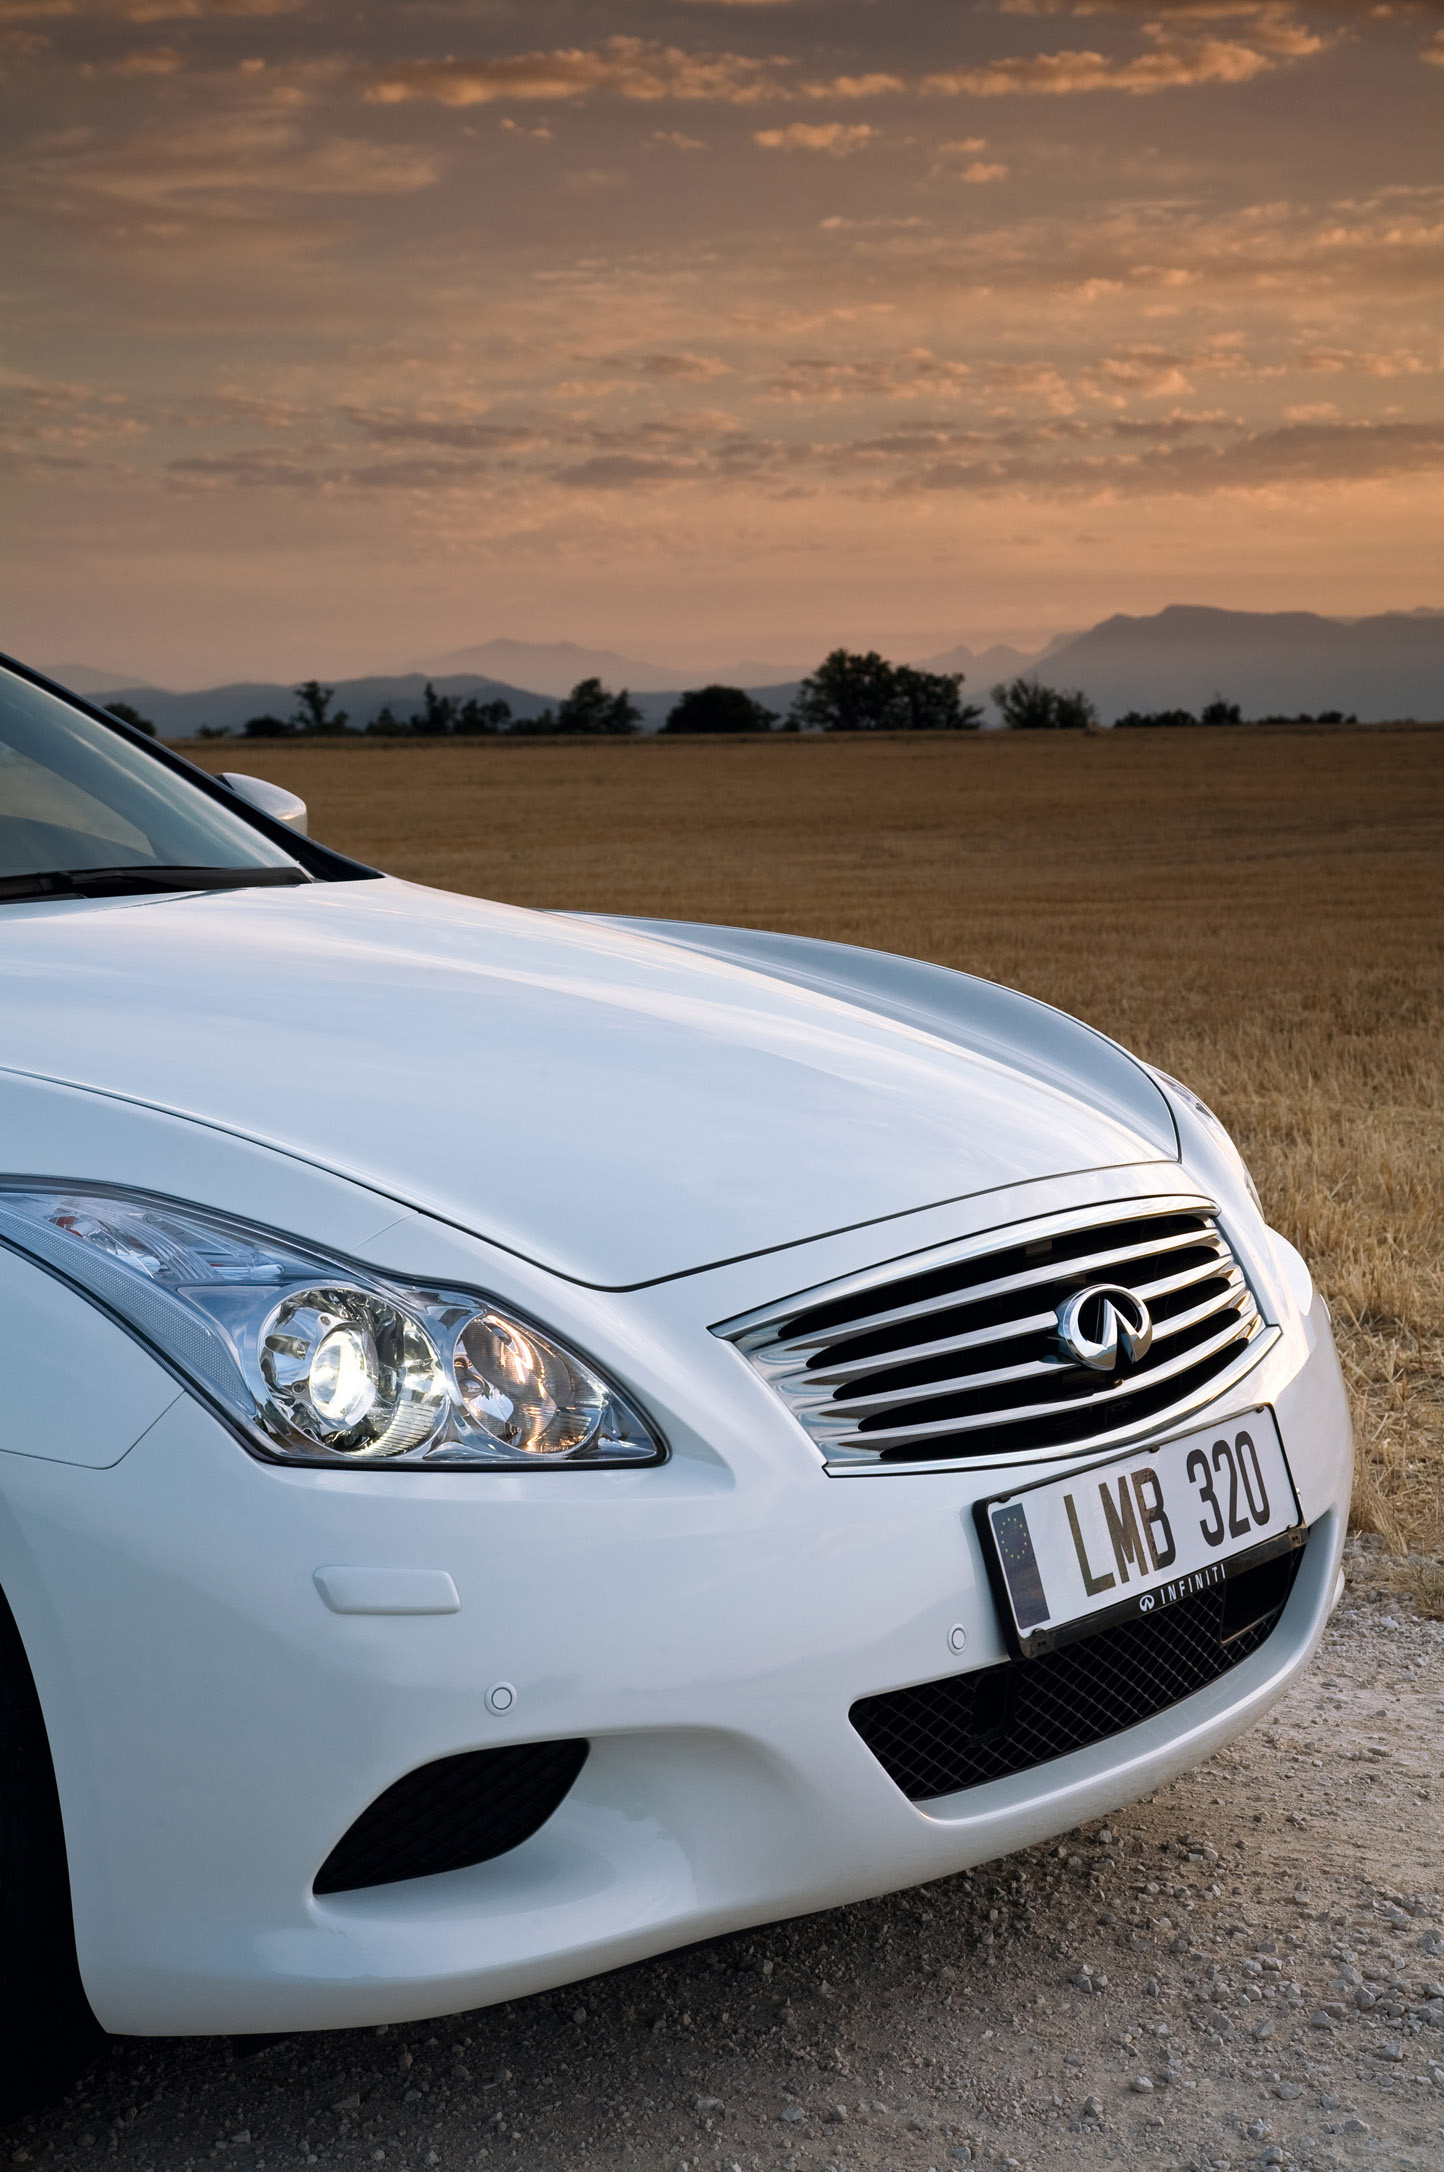 Infiniti G37 luxury car, G37 coupe 2009, High-definition image, Automotive excellence, 1450x2180 HD Phone